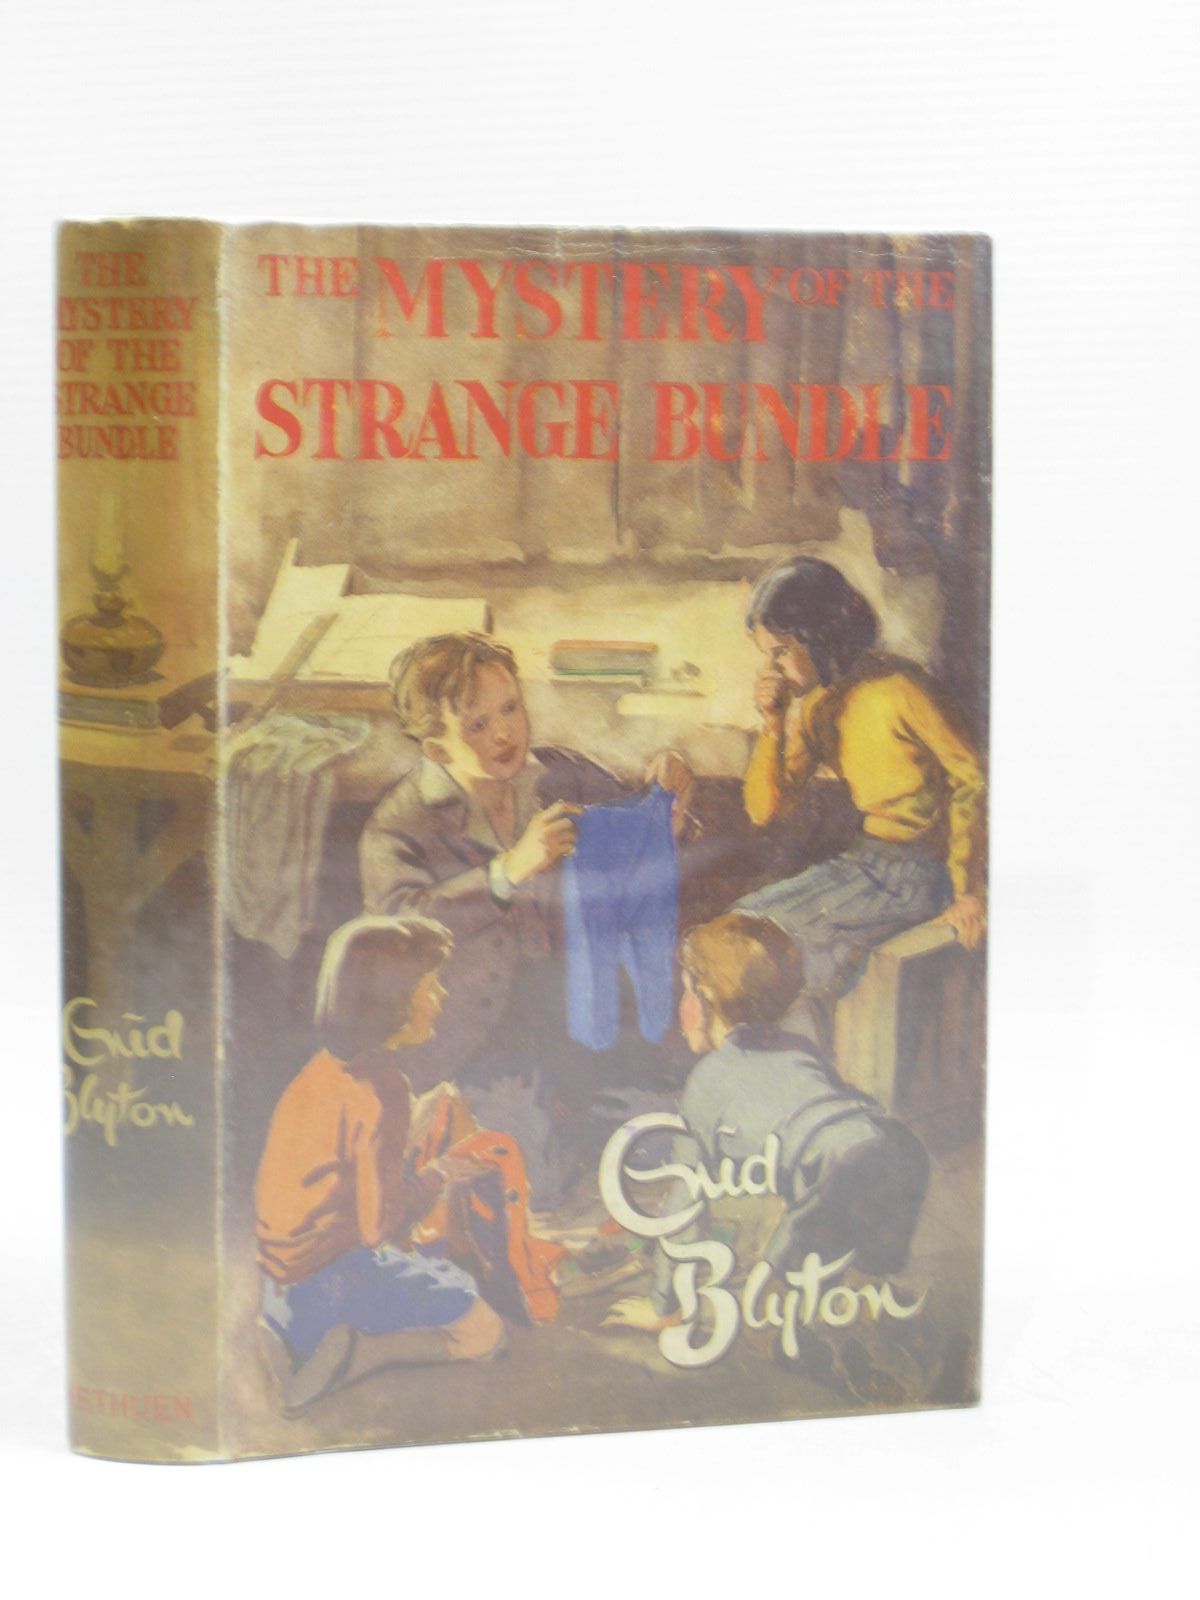 Cover of THE MYSTERY OF THE STRANGE BUNDLE by Enid Blyton